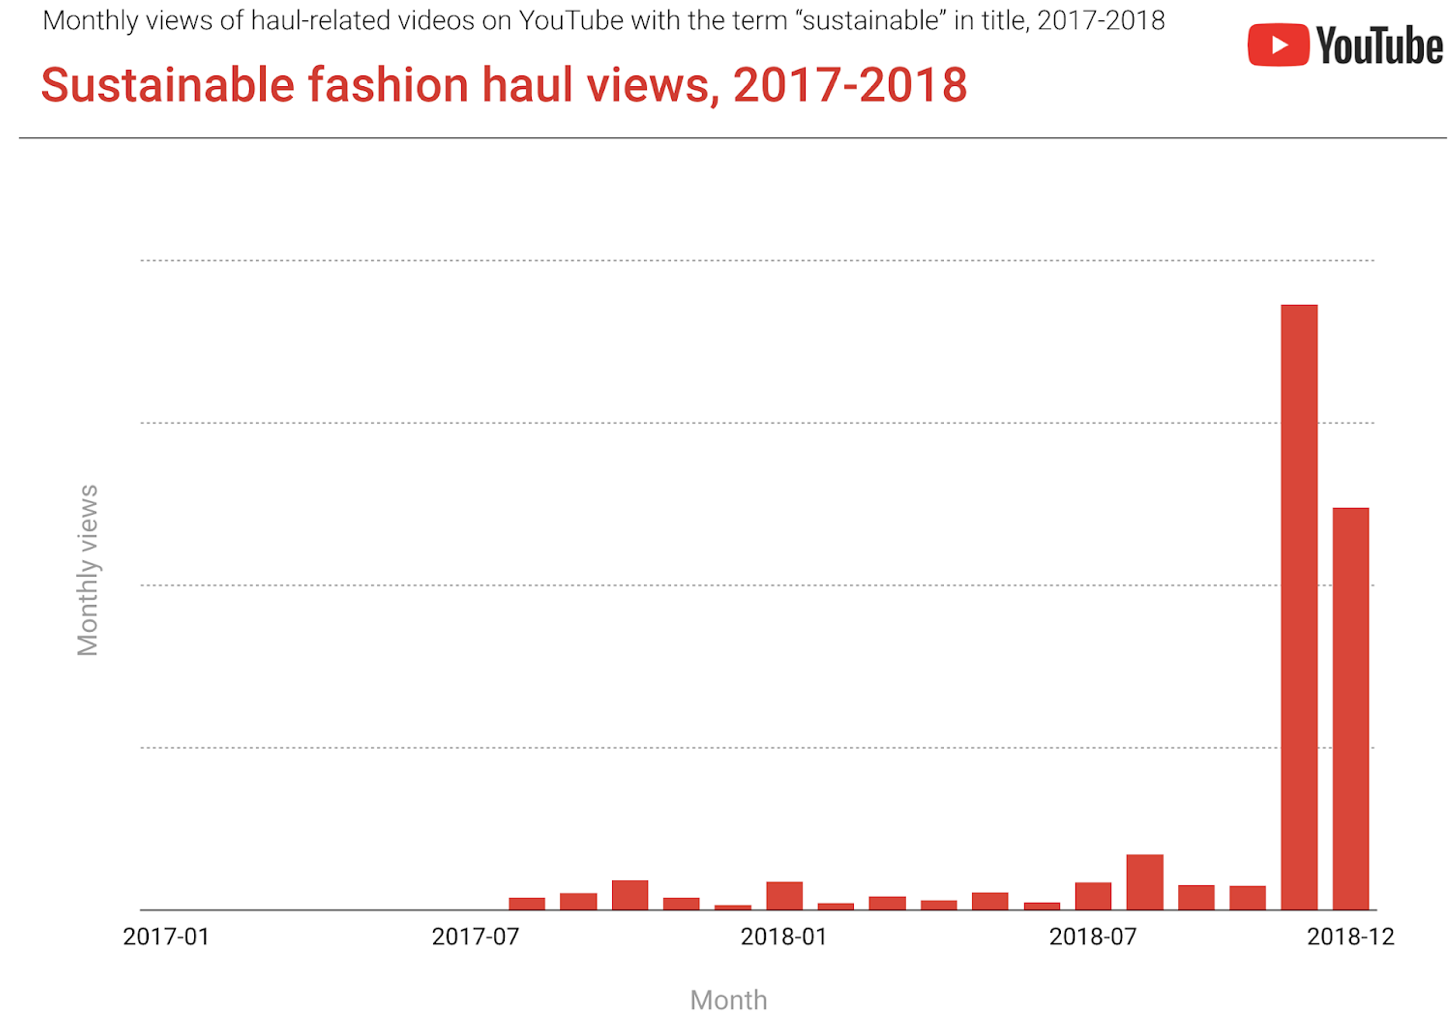 graph showing the development of youtube sustainable fashion haul views over the last 2 years